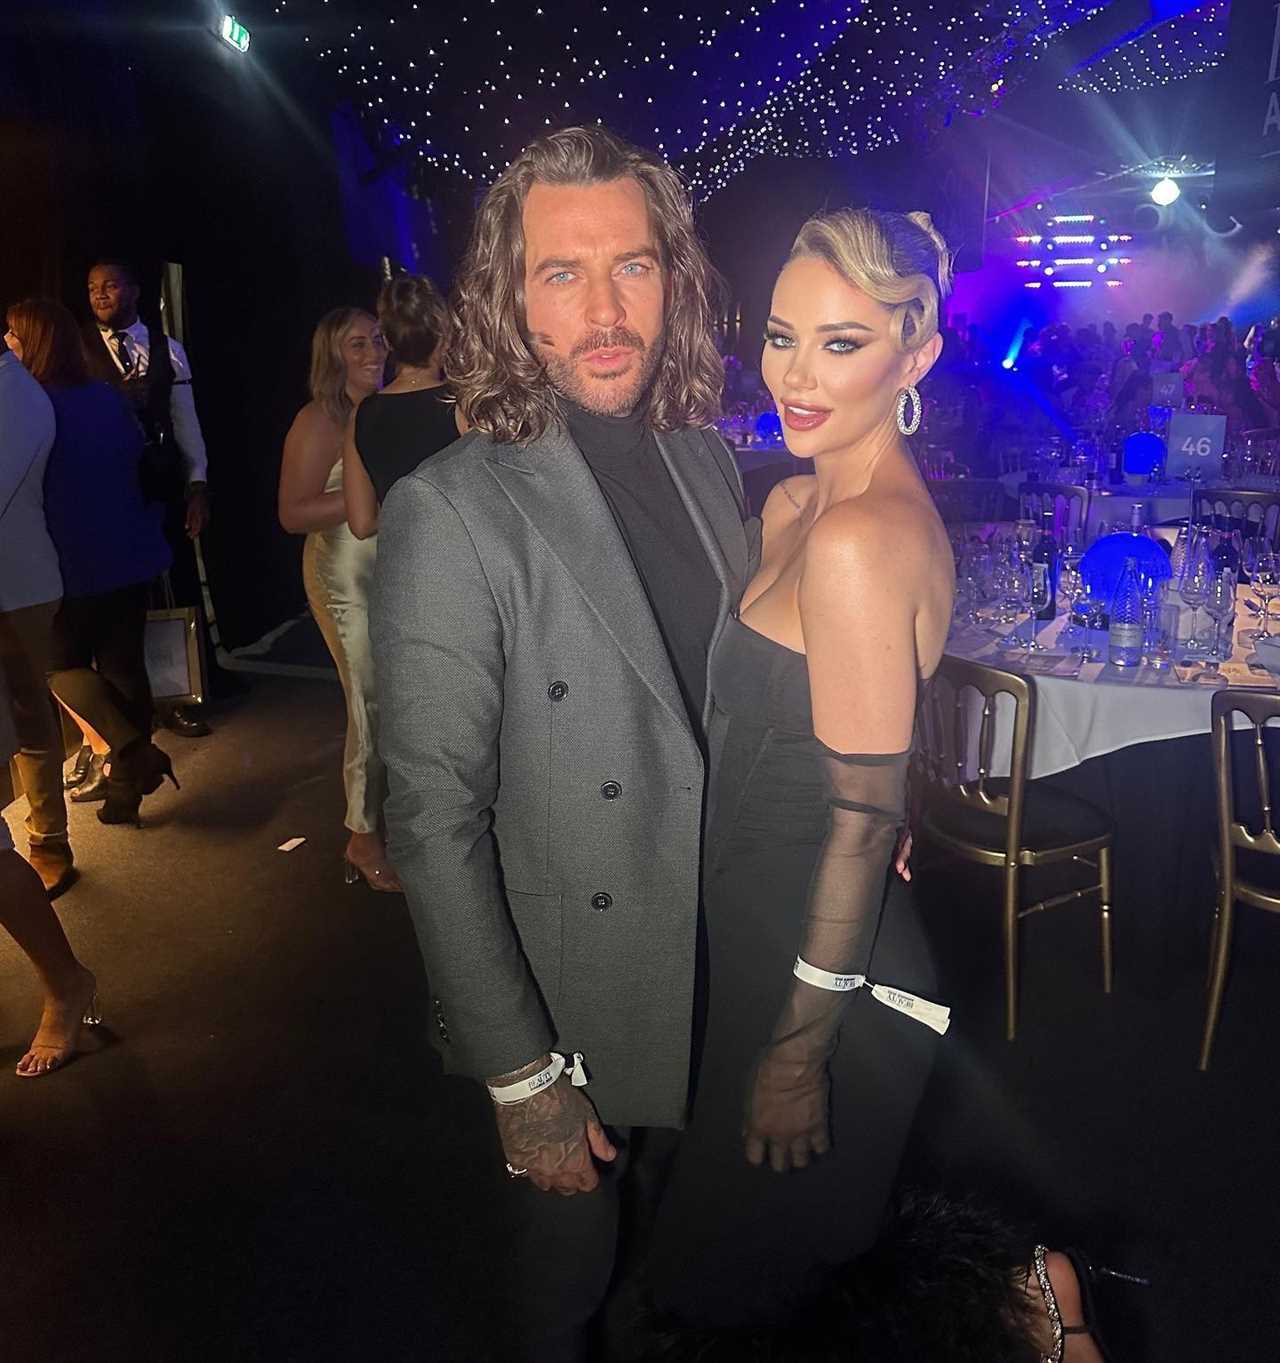 MAFS Star Jessika Power Sparks Romance Rumours with Pete Wicks as They Cosy Up on Night Out